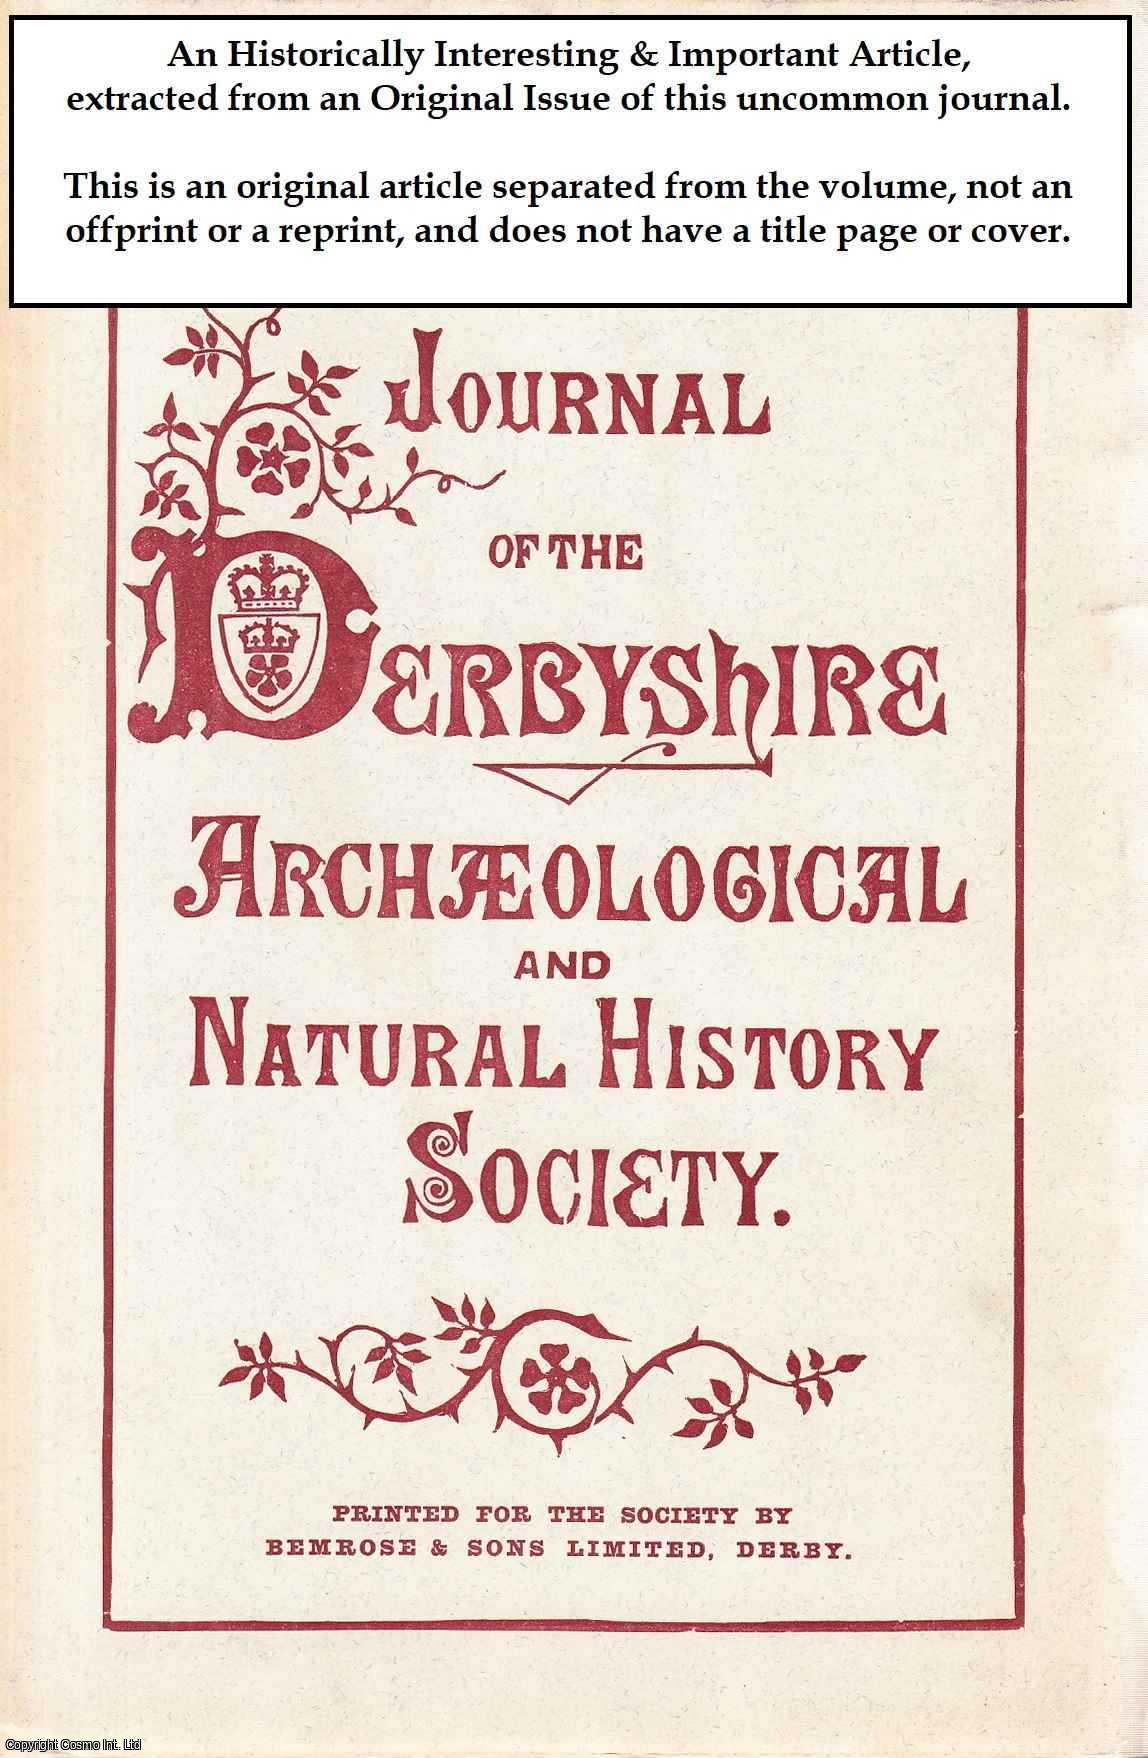 S. O. Addy - The Names of The Derbyshire and Staffordshire Barrows. An original article from the Journal of the Derbyshire Archaeological & Natural History Society, 1908.